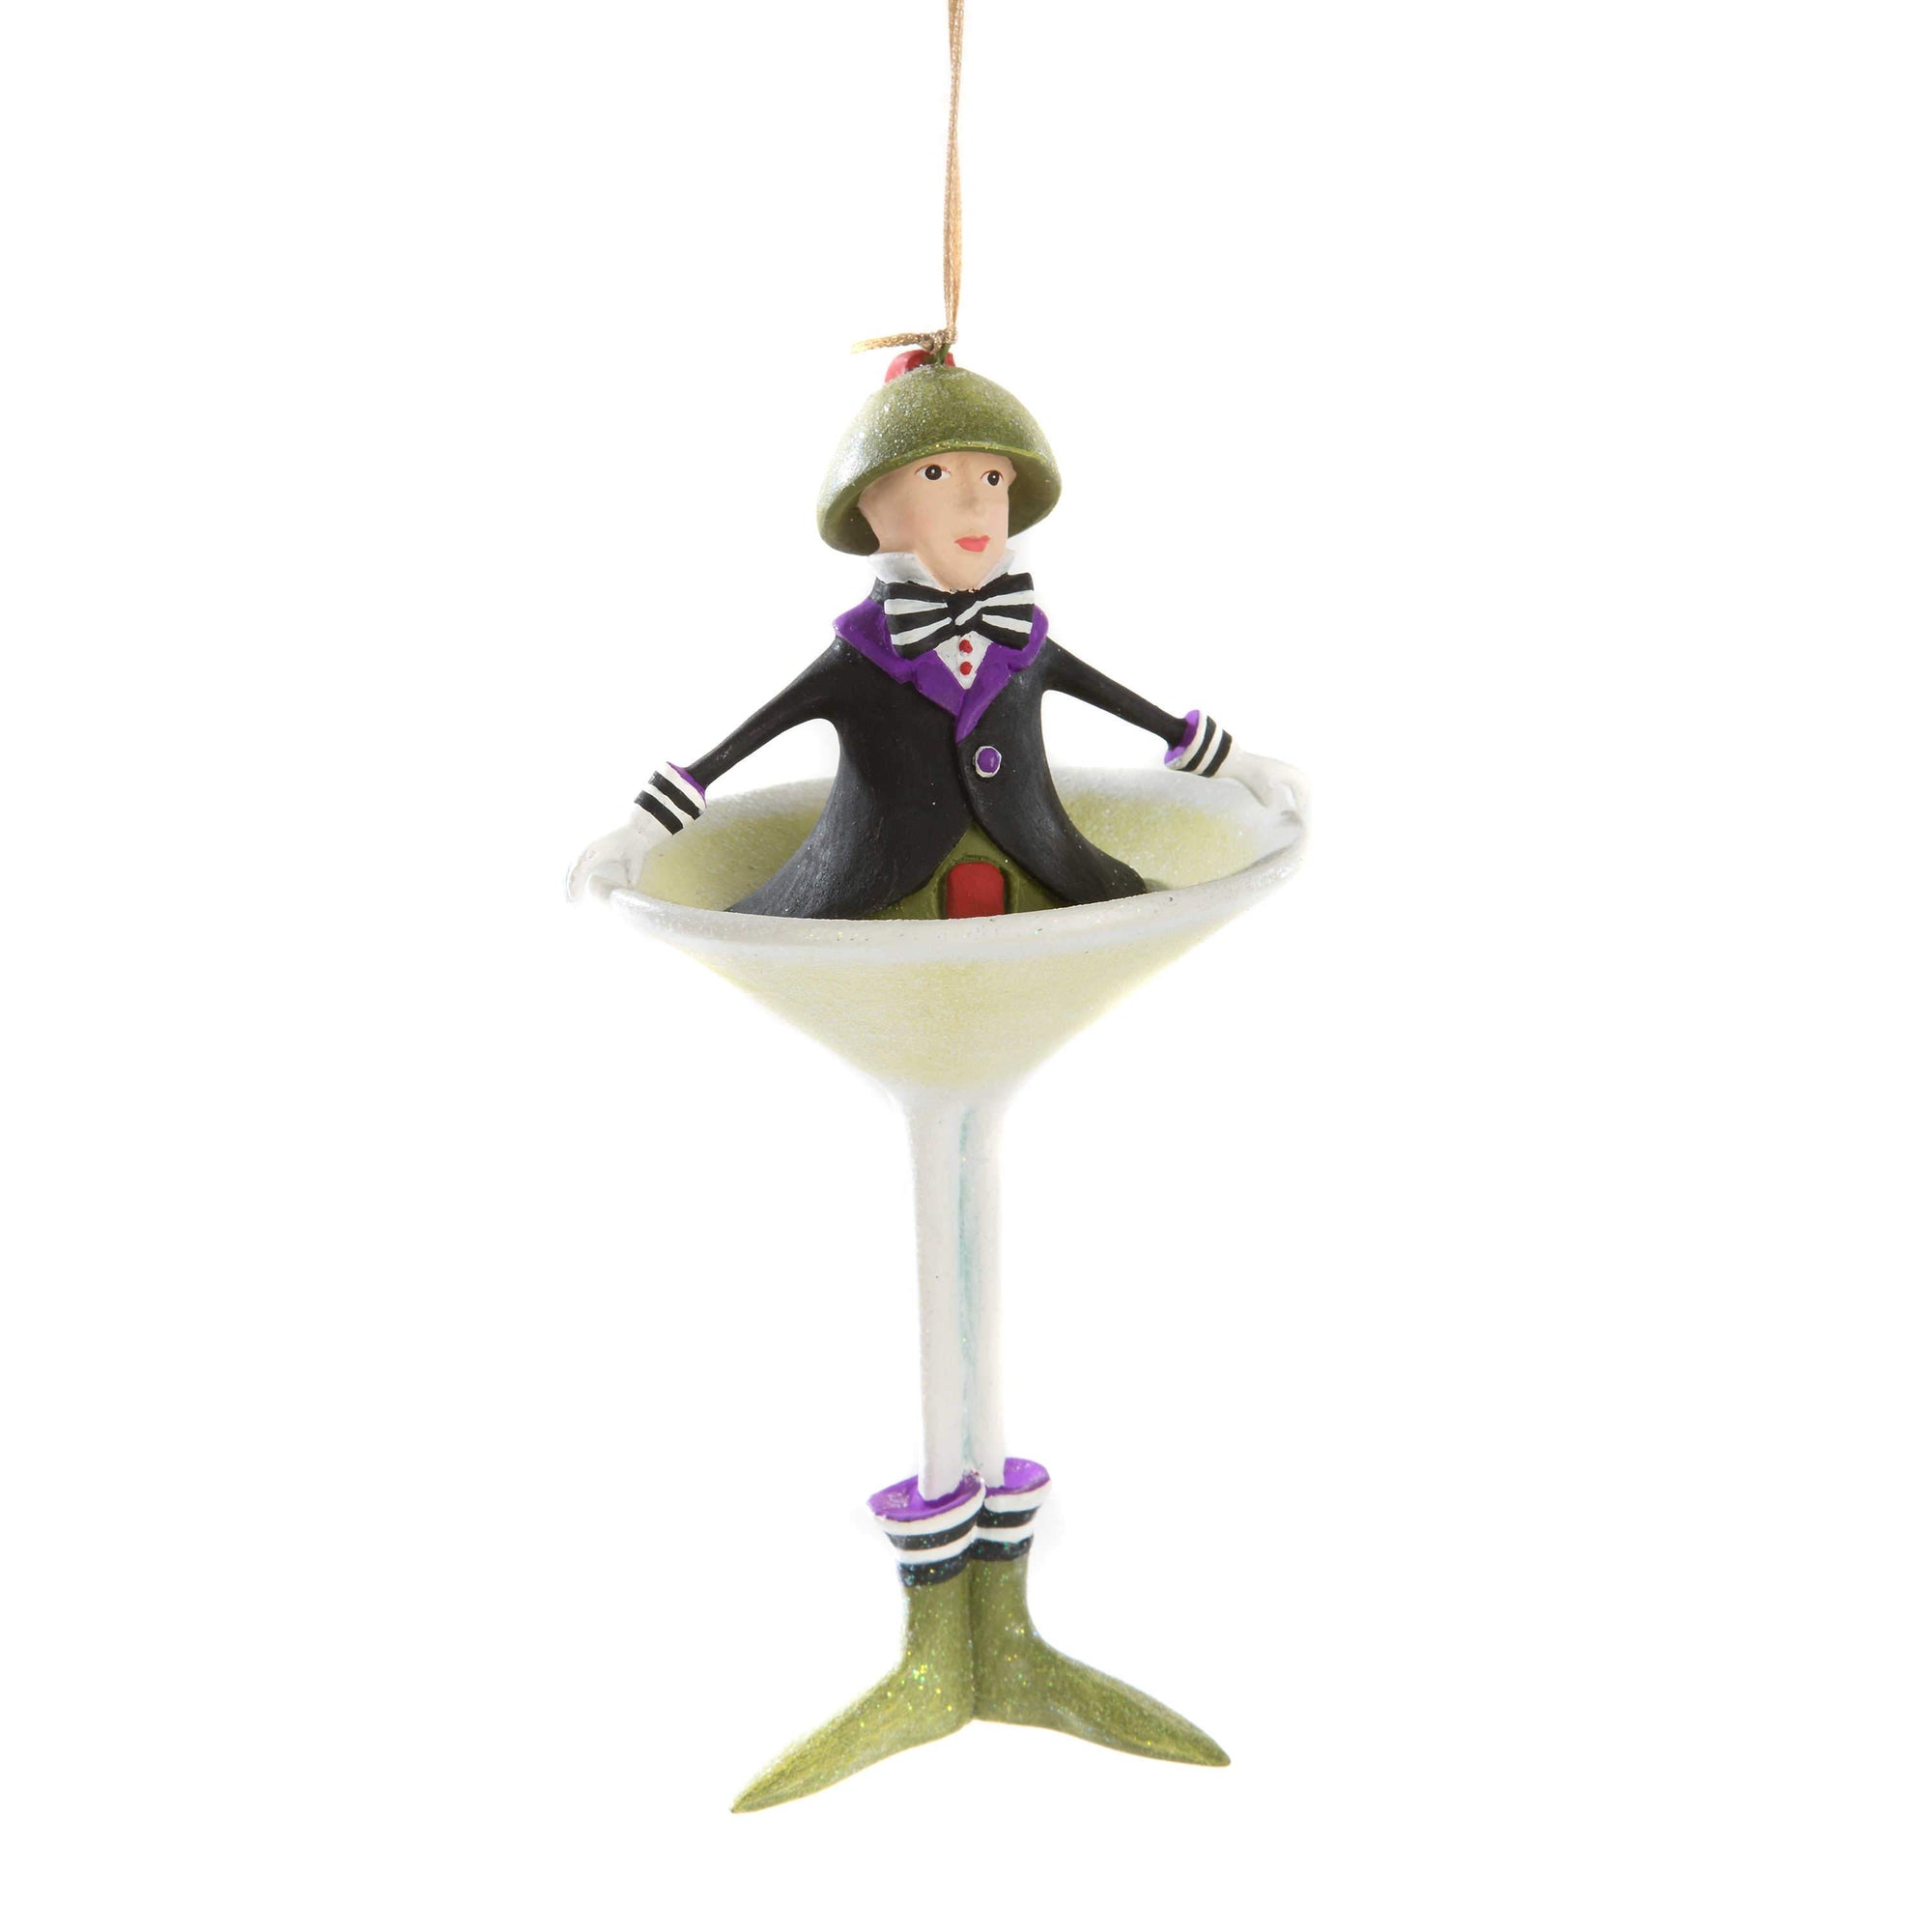 Oliver Martini Hanging Ornament - My Christmas